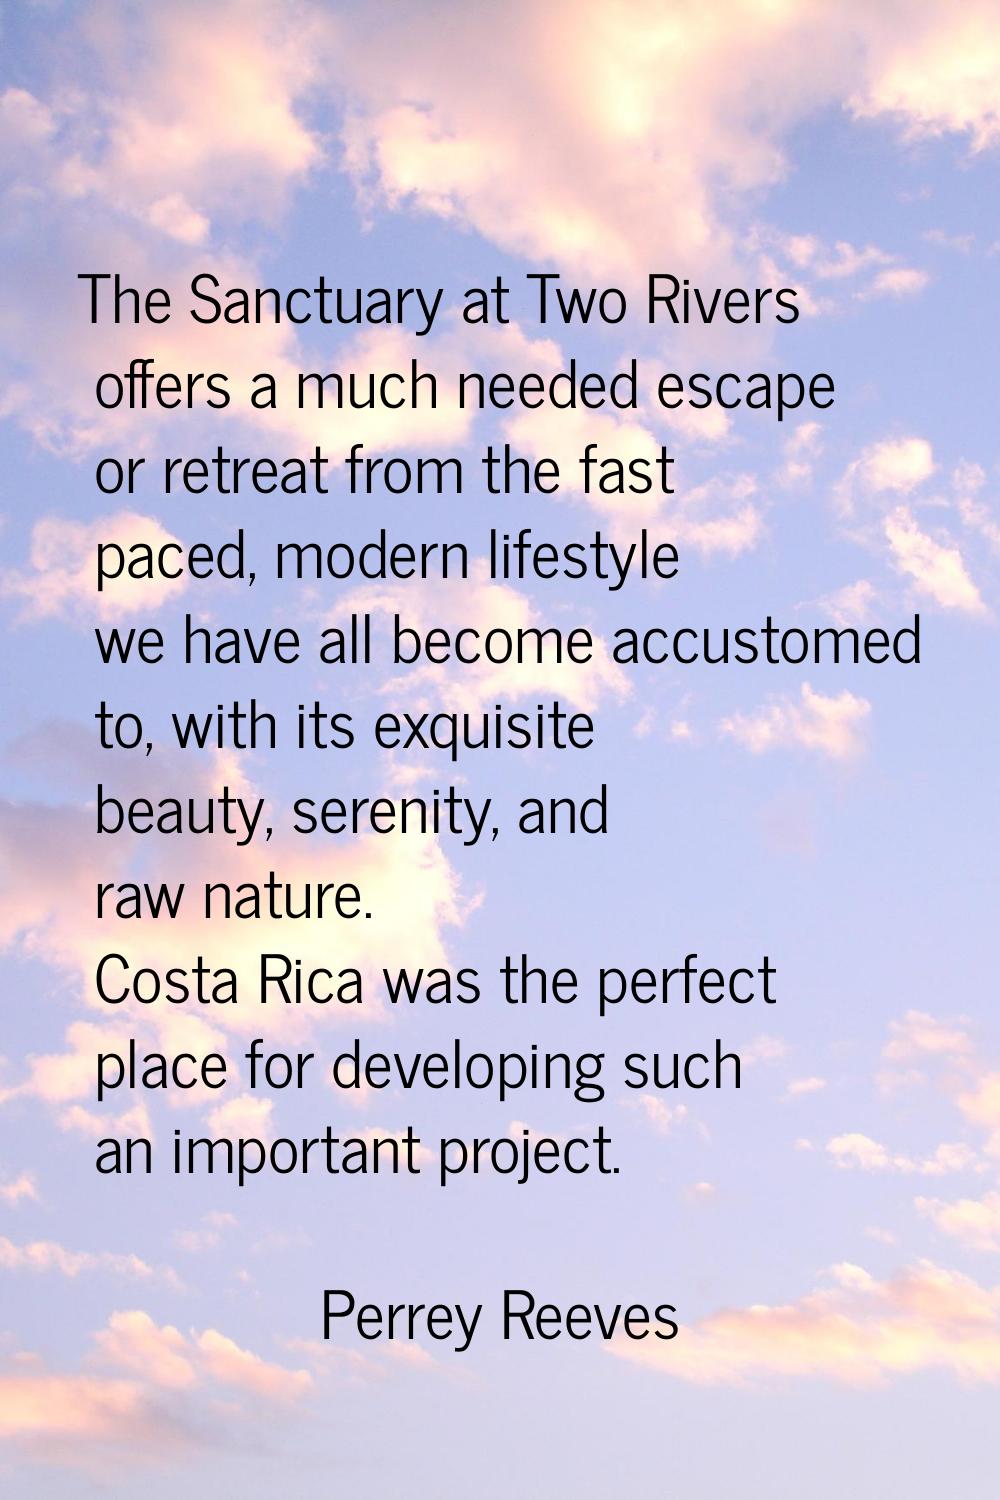 The Sanctuary at Two Rivers offers a much needed escape or retreat from the fast paced, modern life